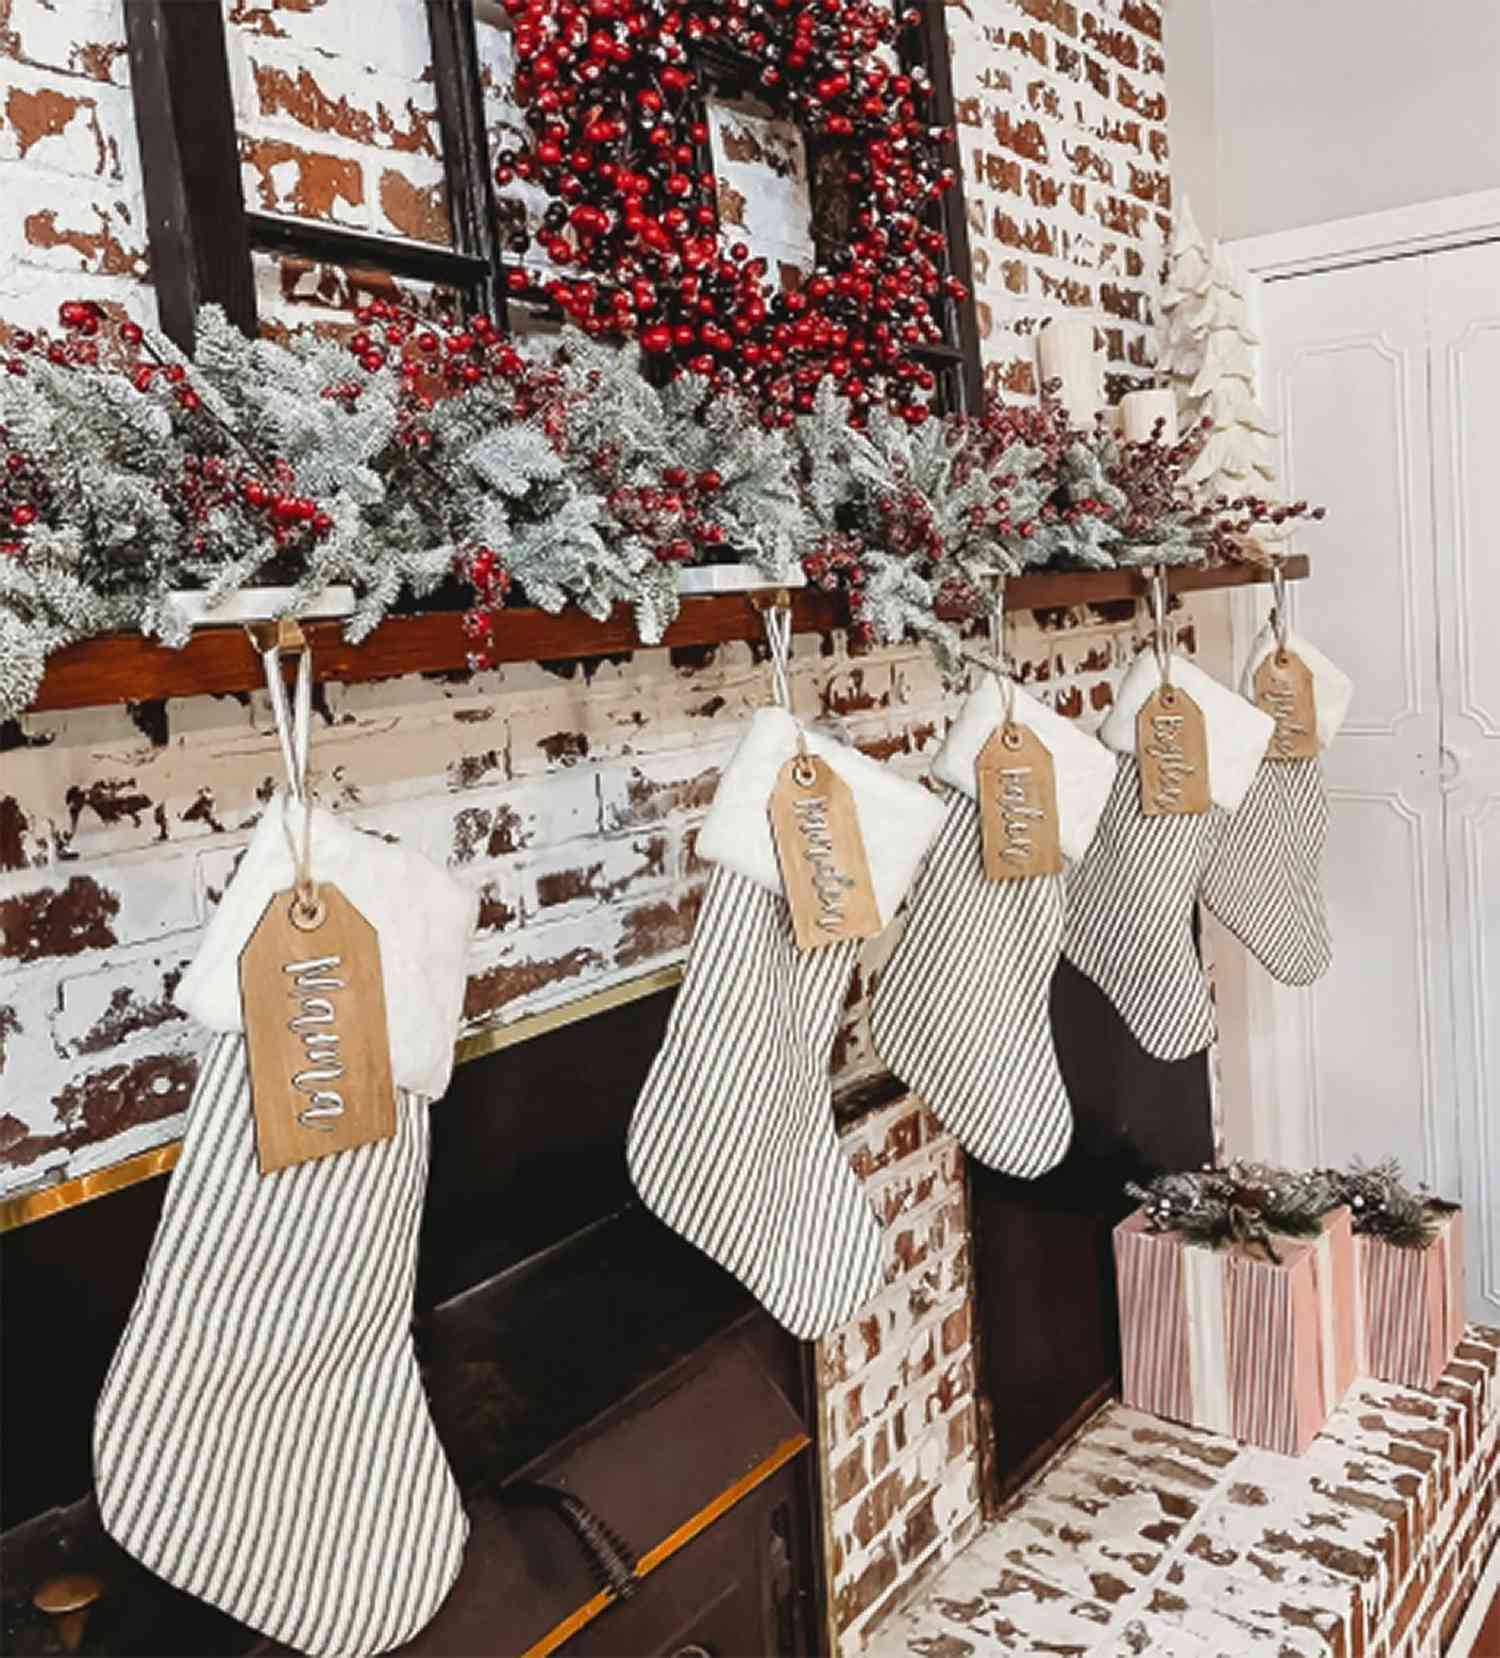 22 of the Best Dog Christmas Stockings This Holiday Season | Daily Paws